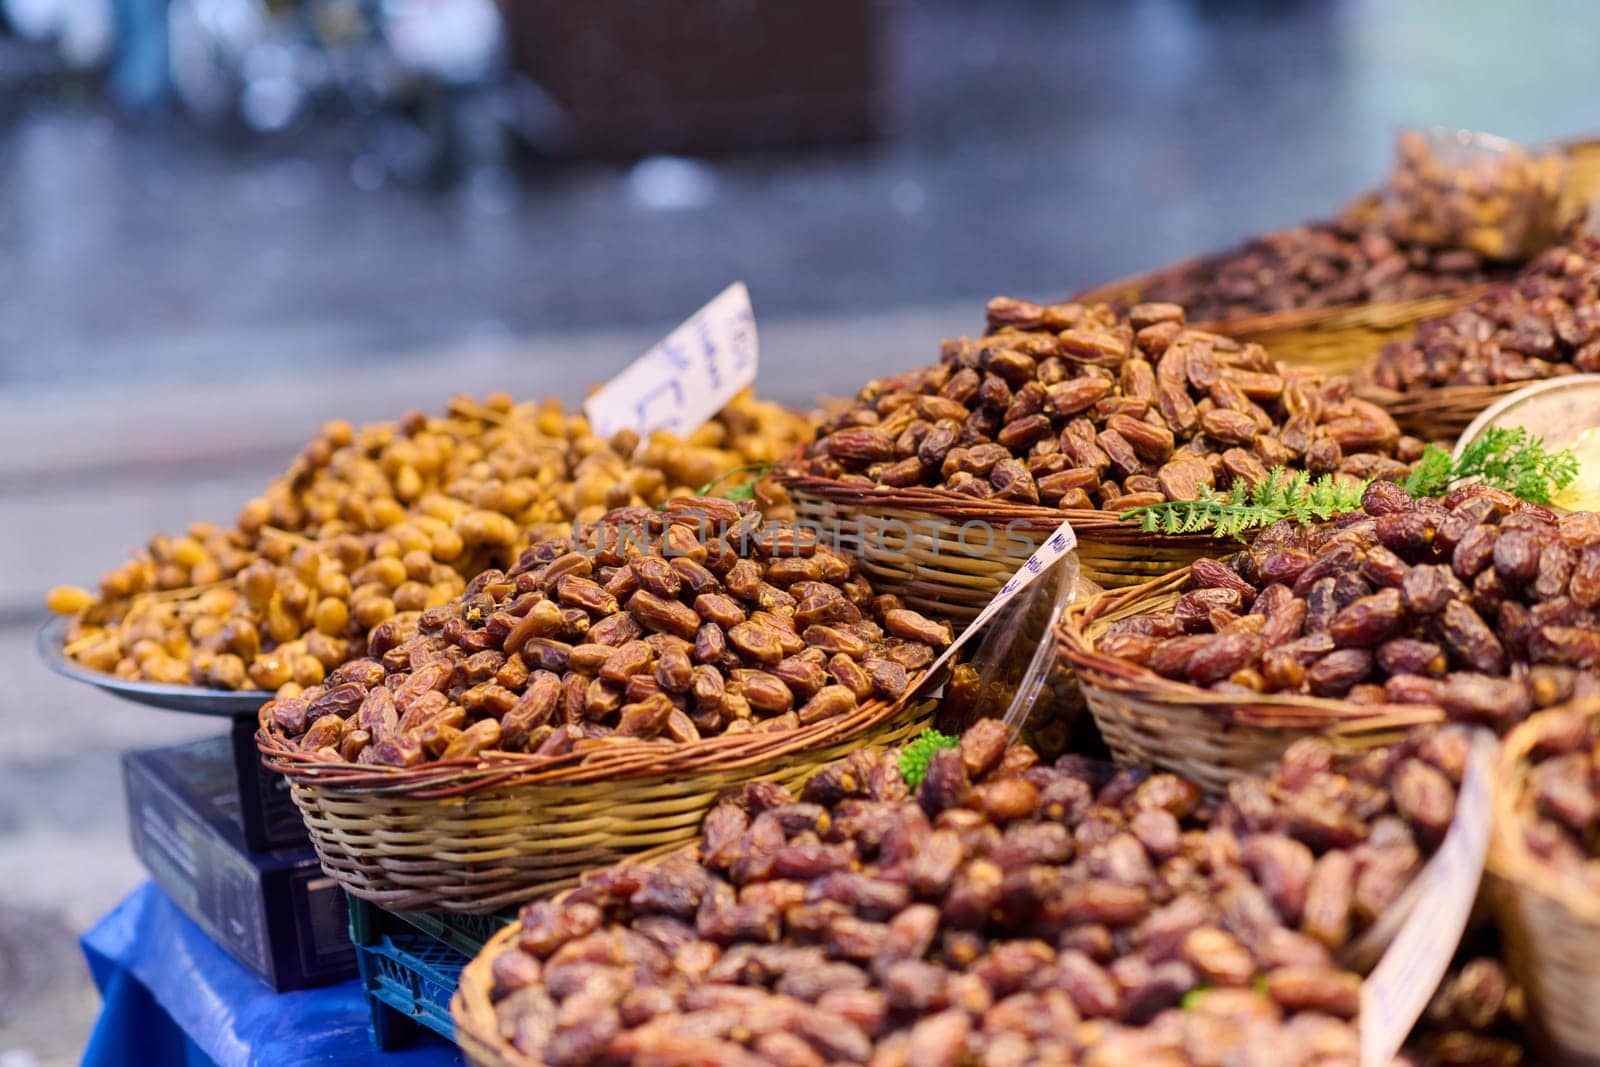 Freshly harvested dates, packed and ready for sale, offer a taste of autumn on the streets of Istanbul.